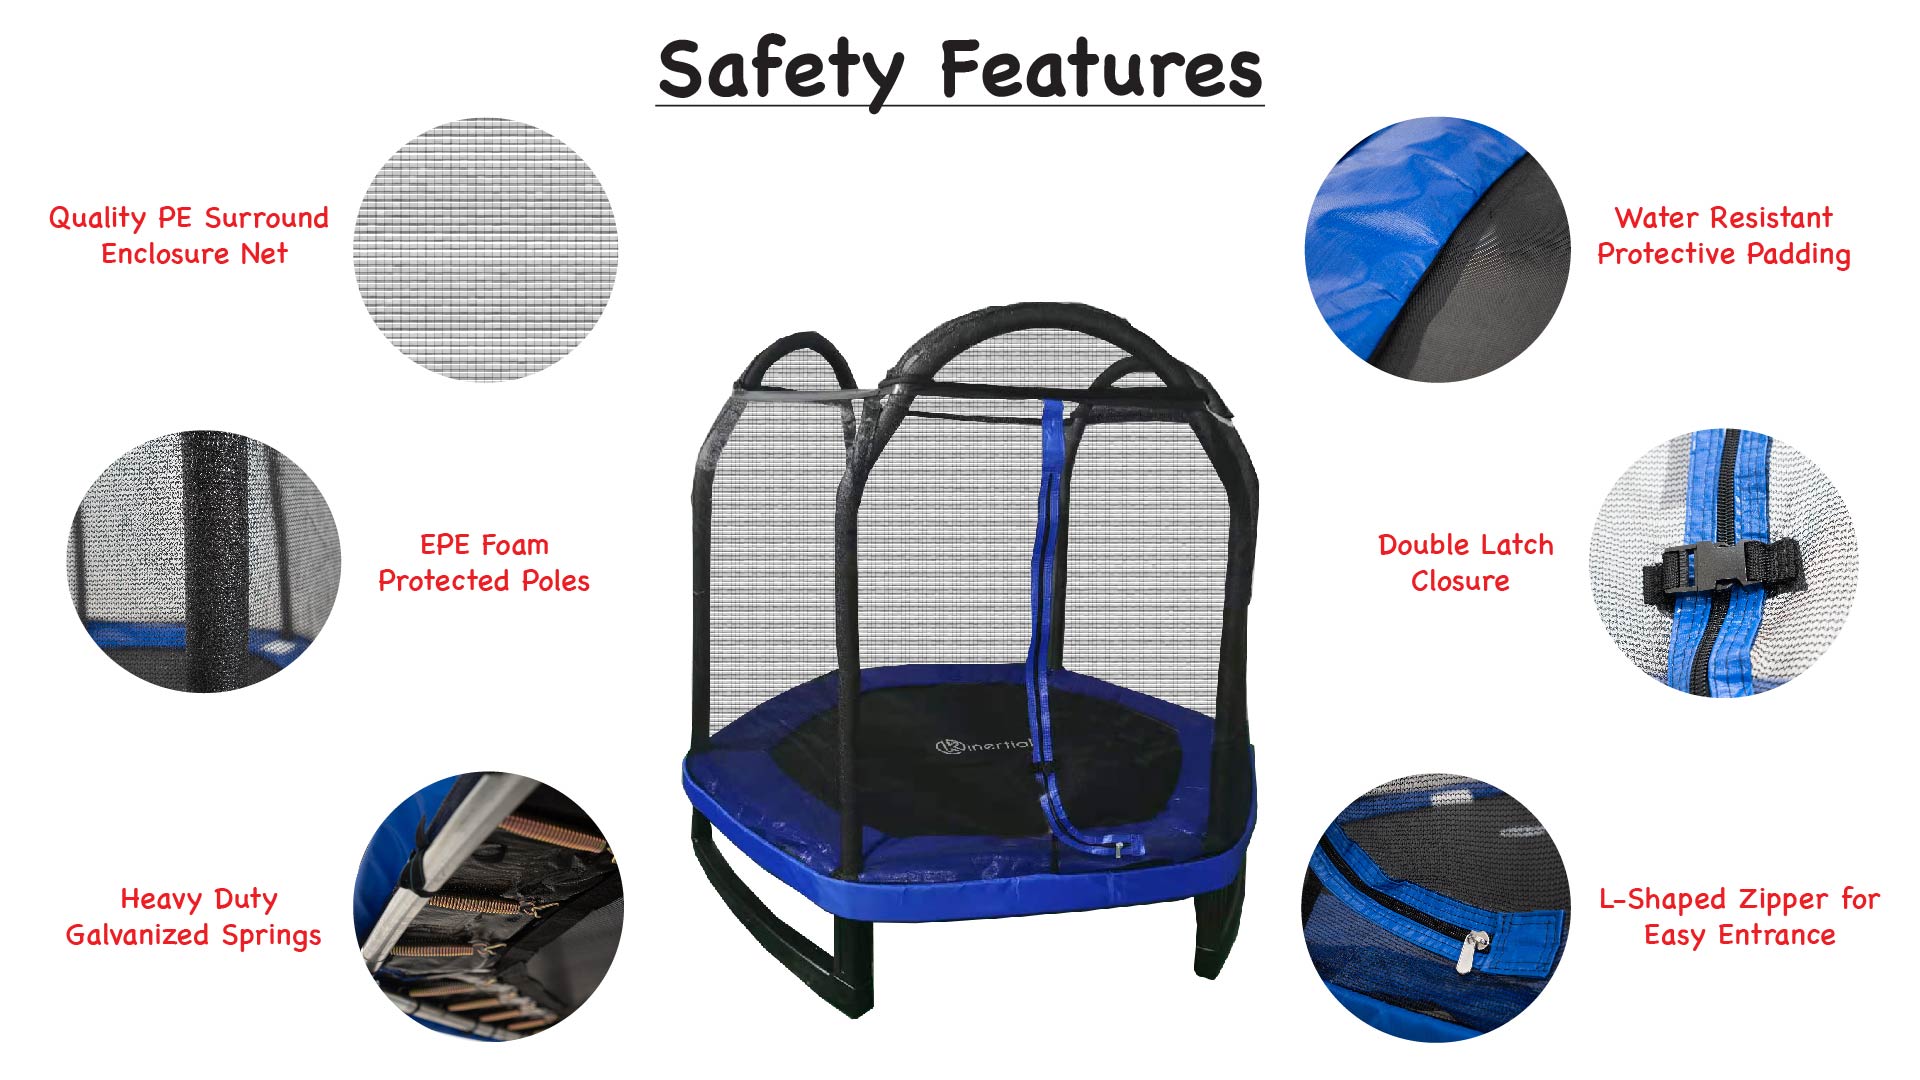 Kinertial 7 ft Hexagonal Kids Trampoline with Safety Enclosure Net (Ages 3 - 10) - image 3 of 9